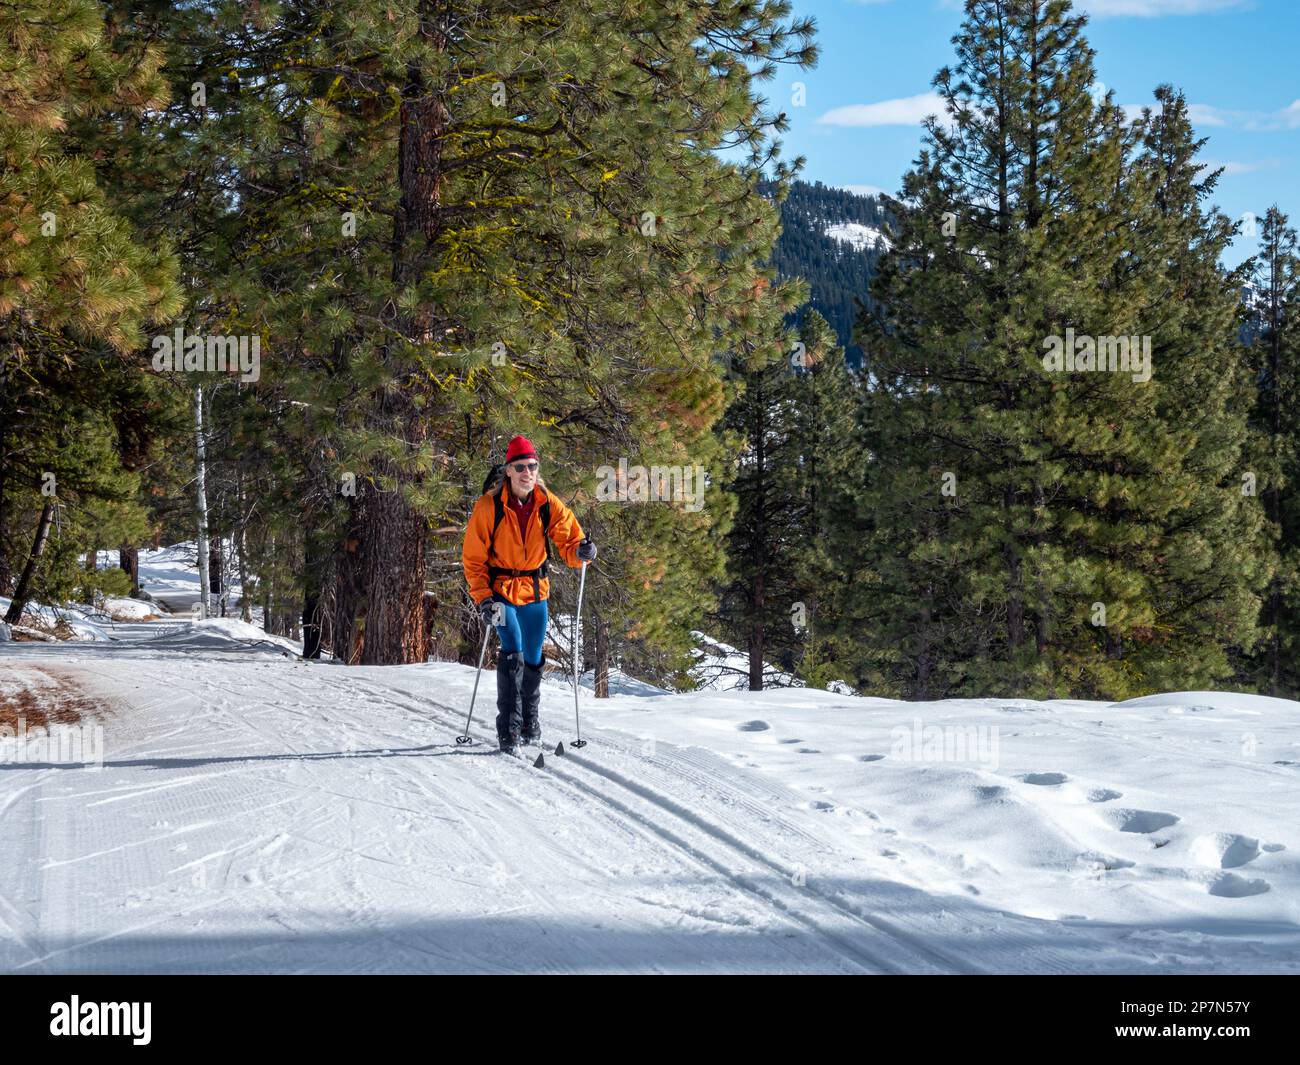 WA23240-00...WASHINGTON - Cross-country skier on the groomed Cassal Hut Trail in the Rendezvous area extensive Methow Valley trail system. Stock Photo